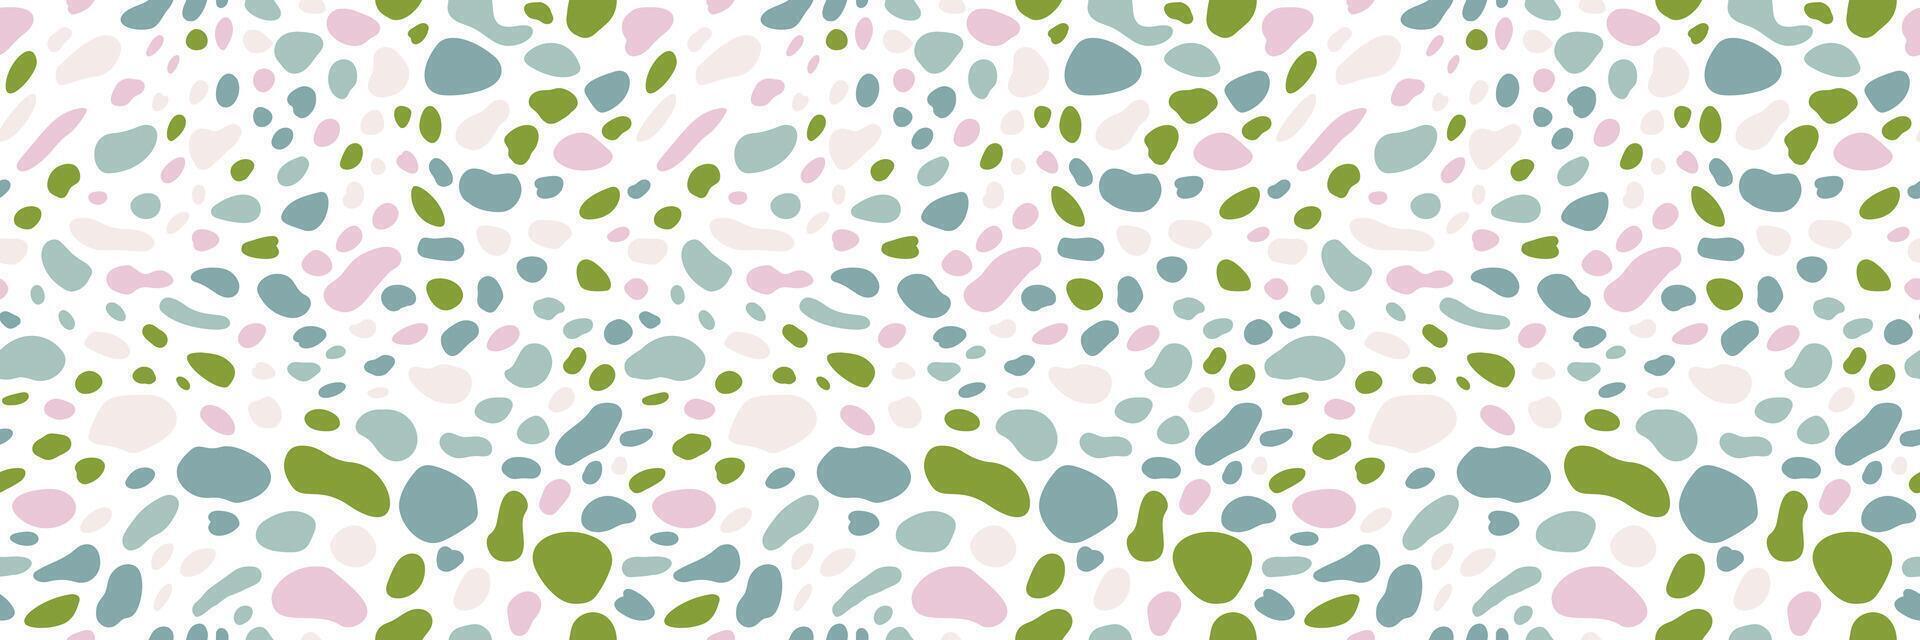 Seamless pattern spots. Animal fur texture surface. Abstract speckled design. vector